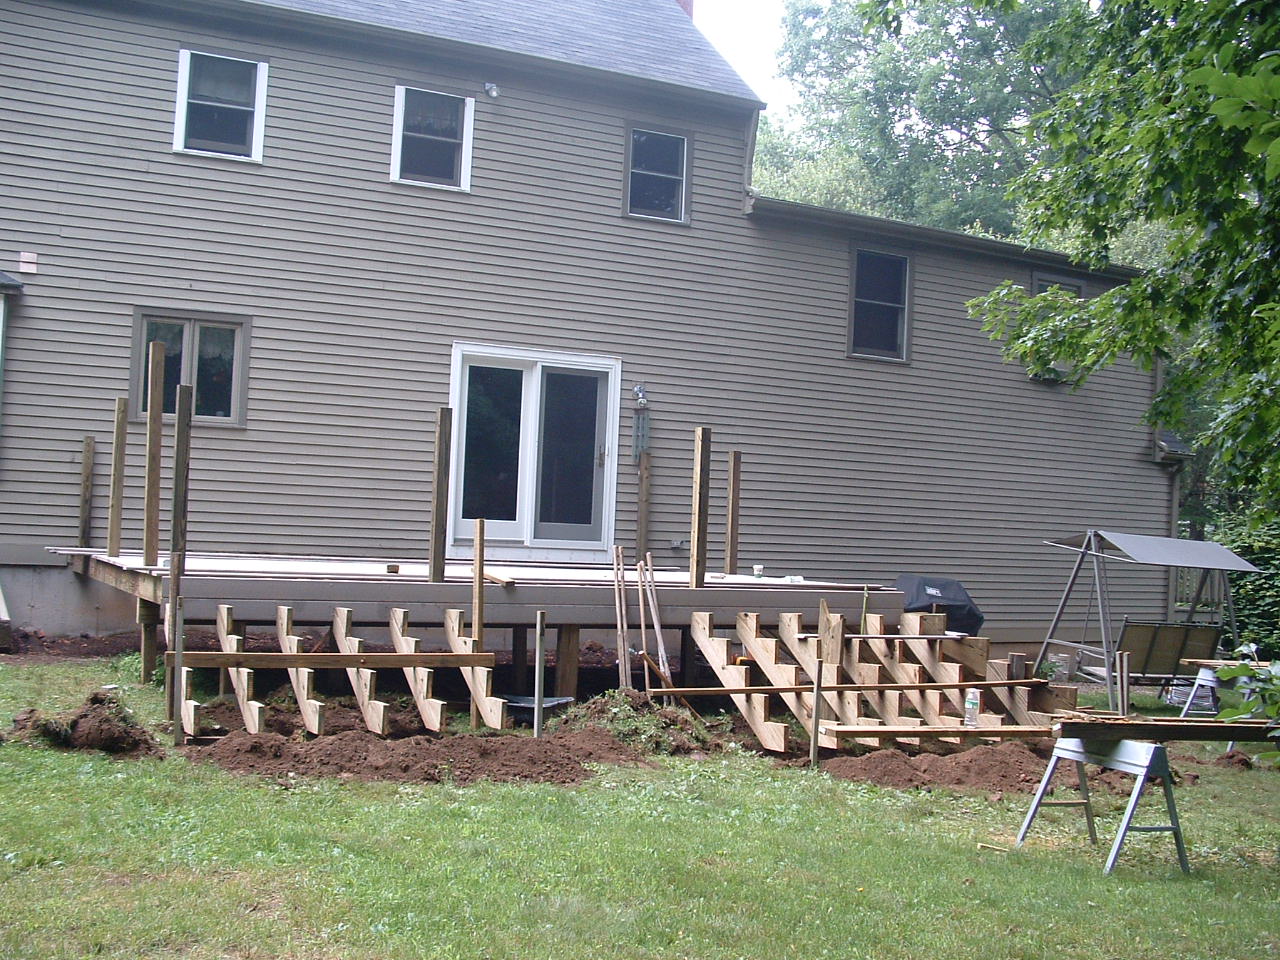  decking boards. We also added wrap around stairs and a built-on bench